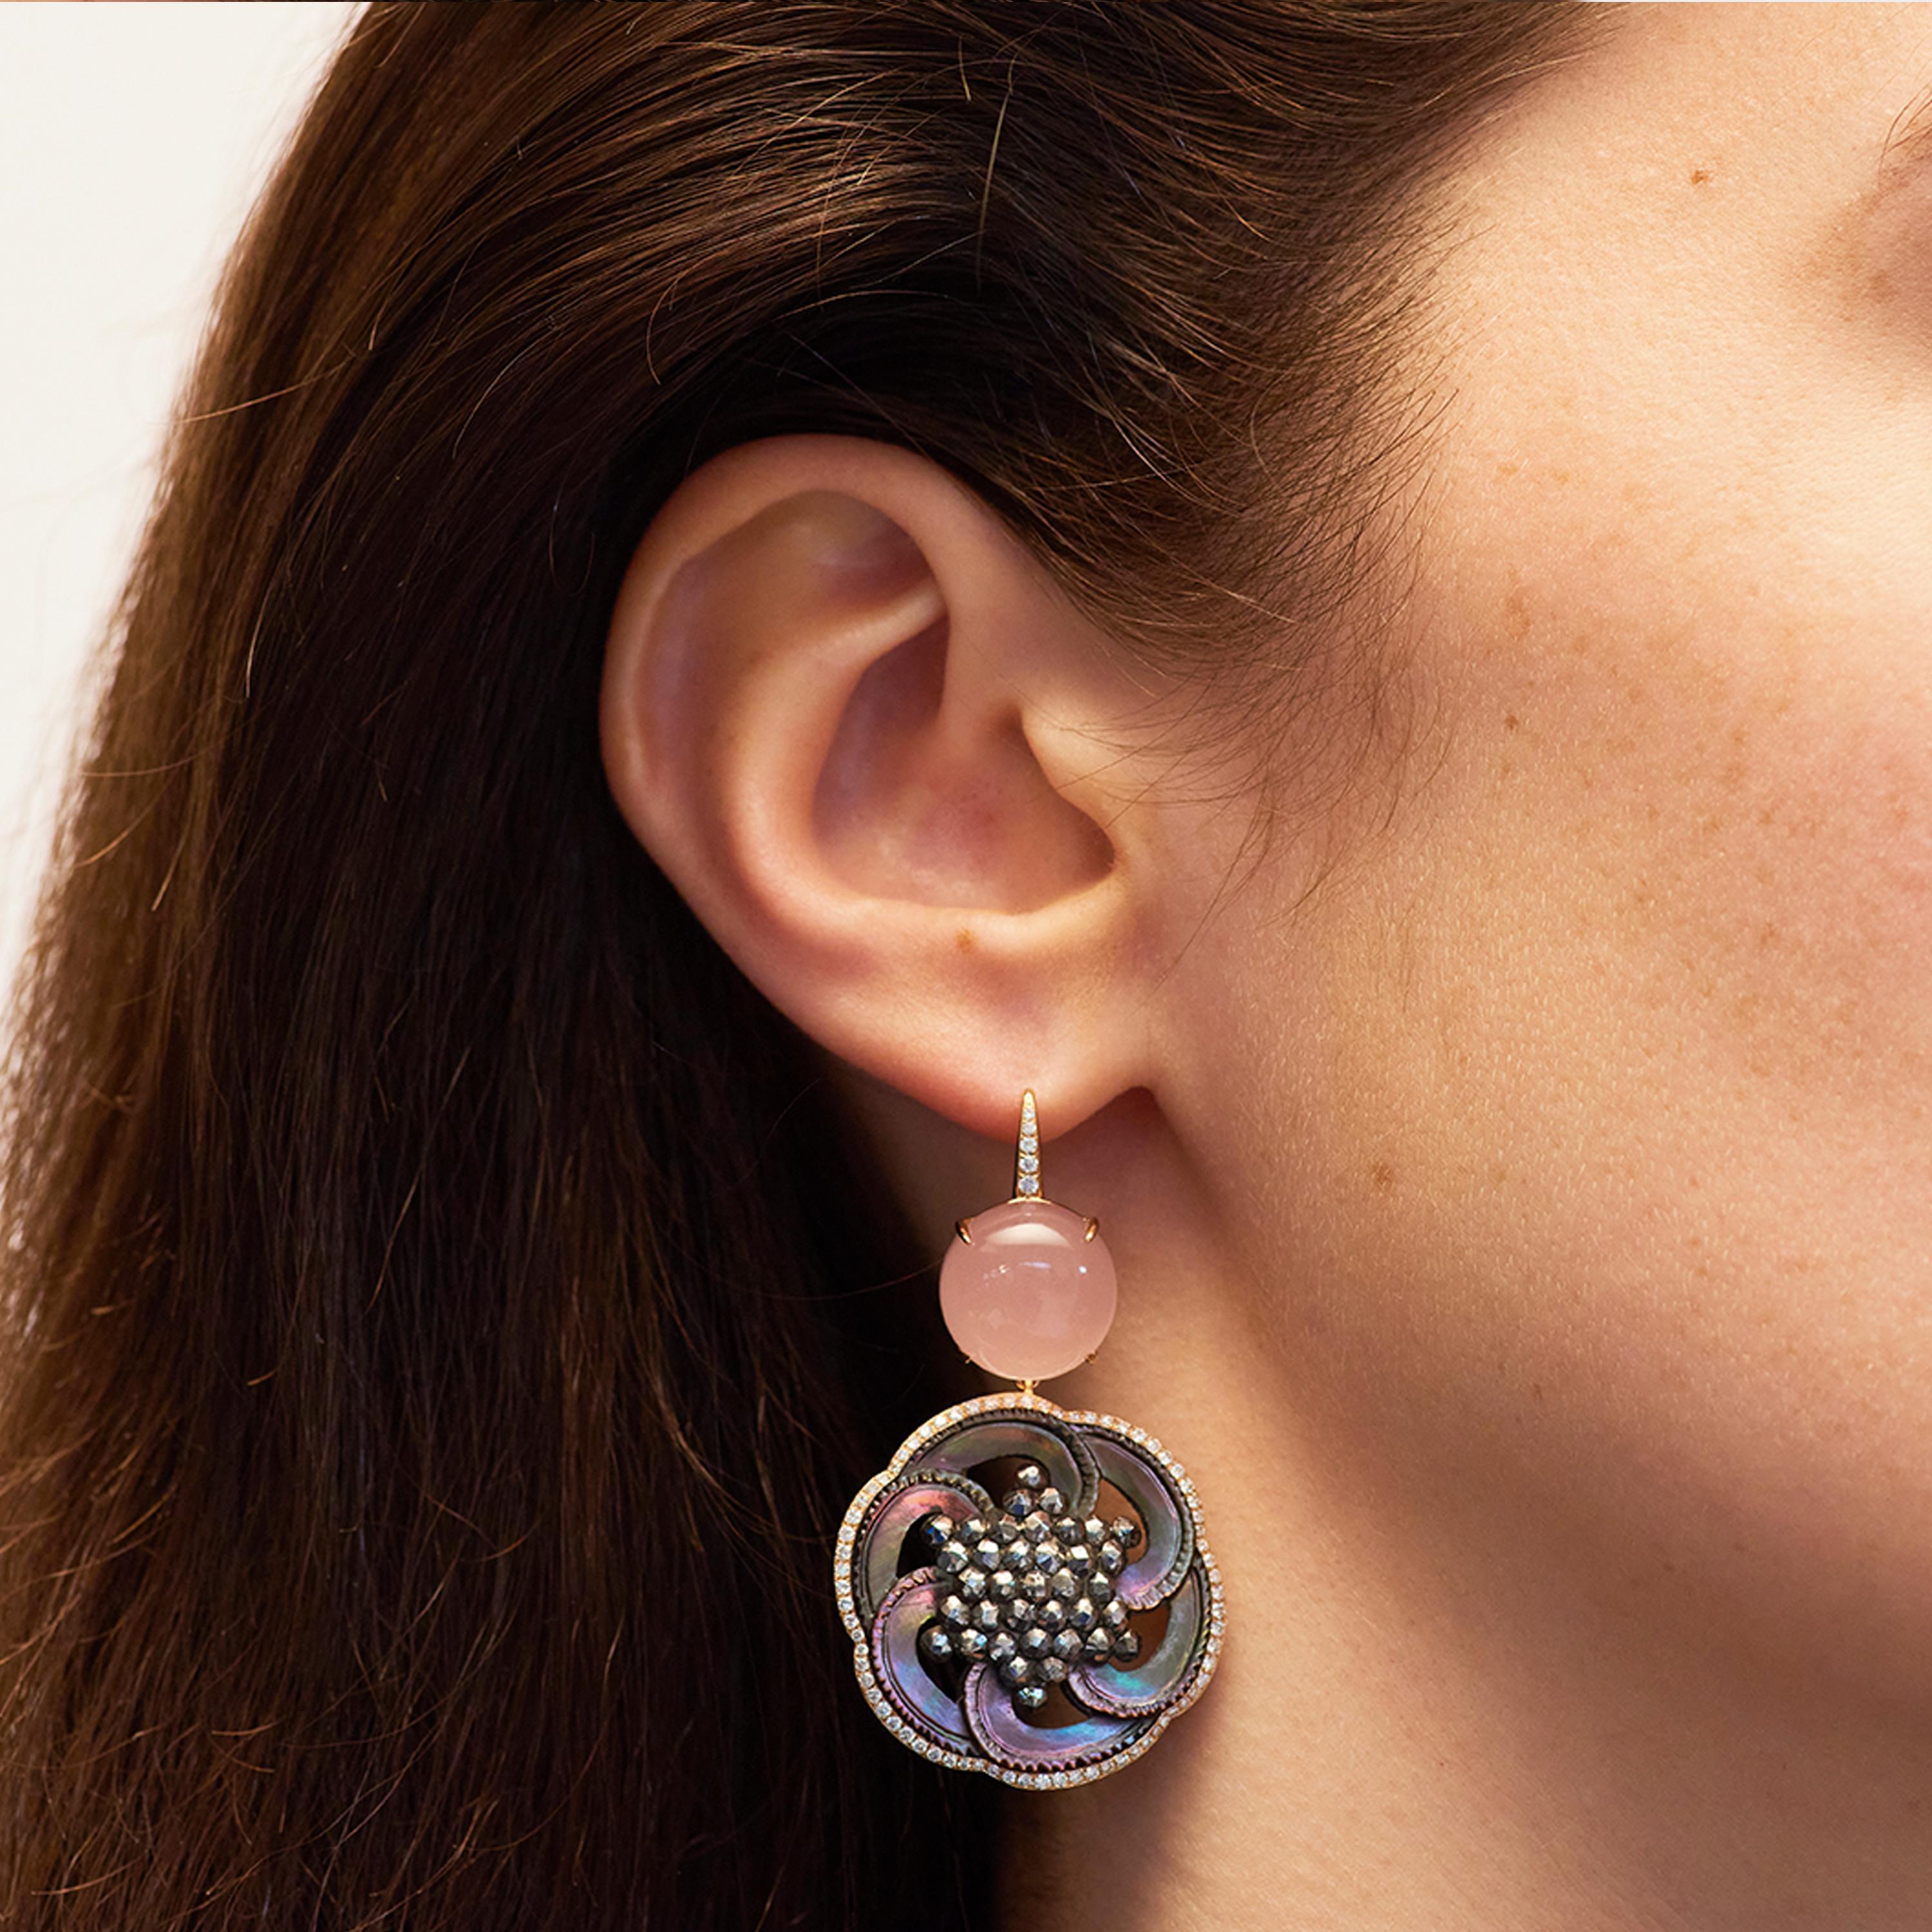 Set in 18 karat white gold (30g), Francesca Villa's black enamel earrings are decorated with diamonds (0.93cts) and rose quartz cabochons. Francesca Villa bought the vintage buttons in London many years ago.

For many years, Francesca Villa was